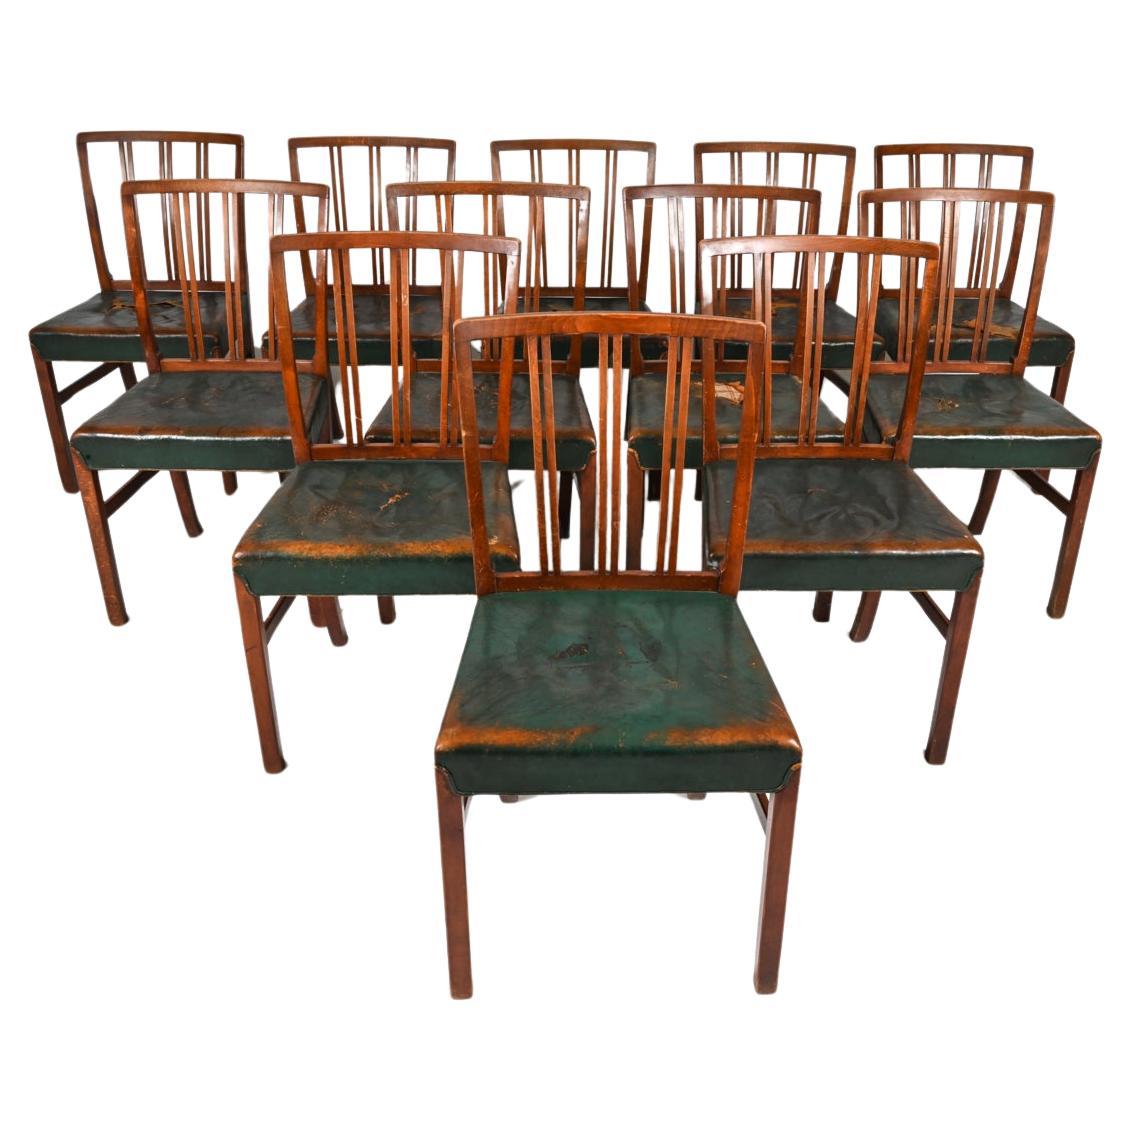 '12' Rare Model 1675B Dining Chairs by Ole Wanscher Fritz Hansen, c. 1940's For Sale